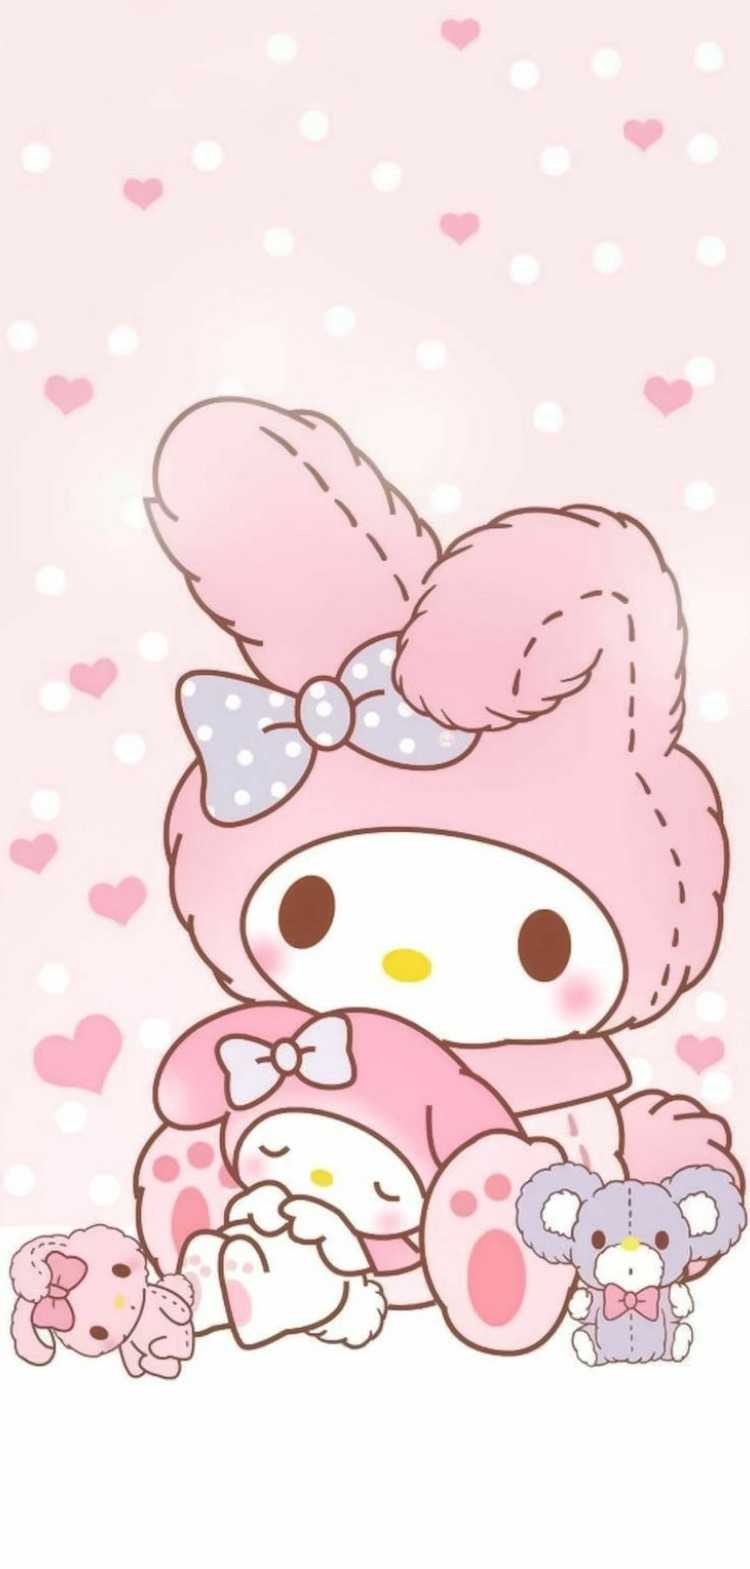 Download Show your Sanrio spirit with this fun and colourful wallpaper   Wallpaperscom